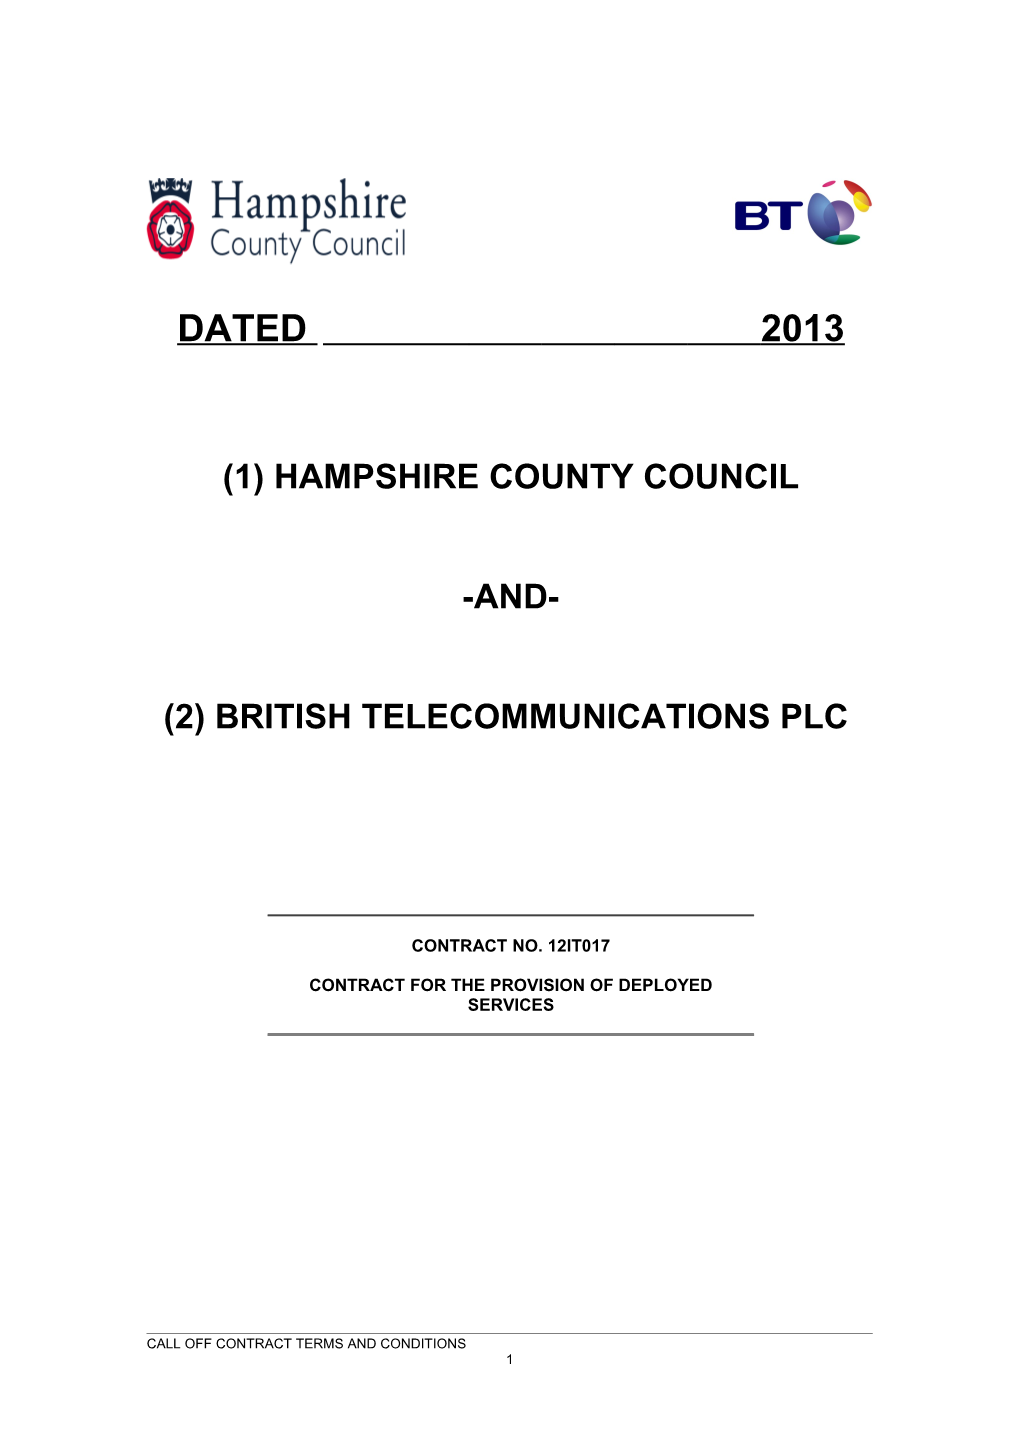 (1) Hampshire County Council